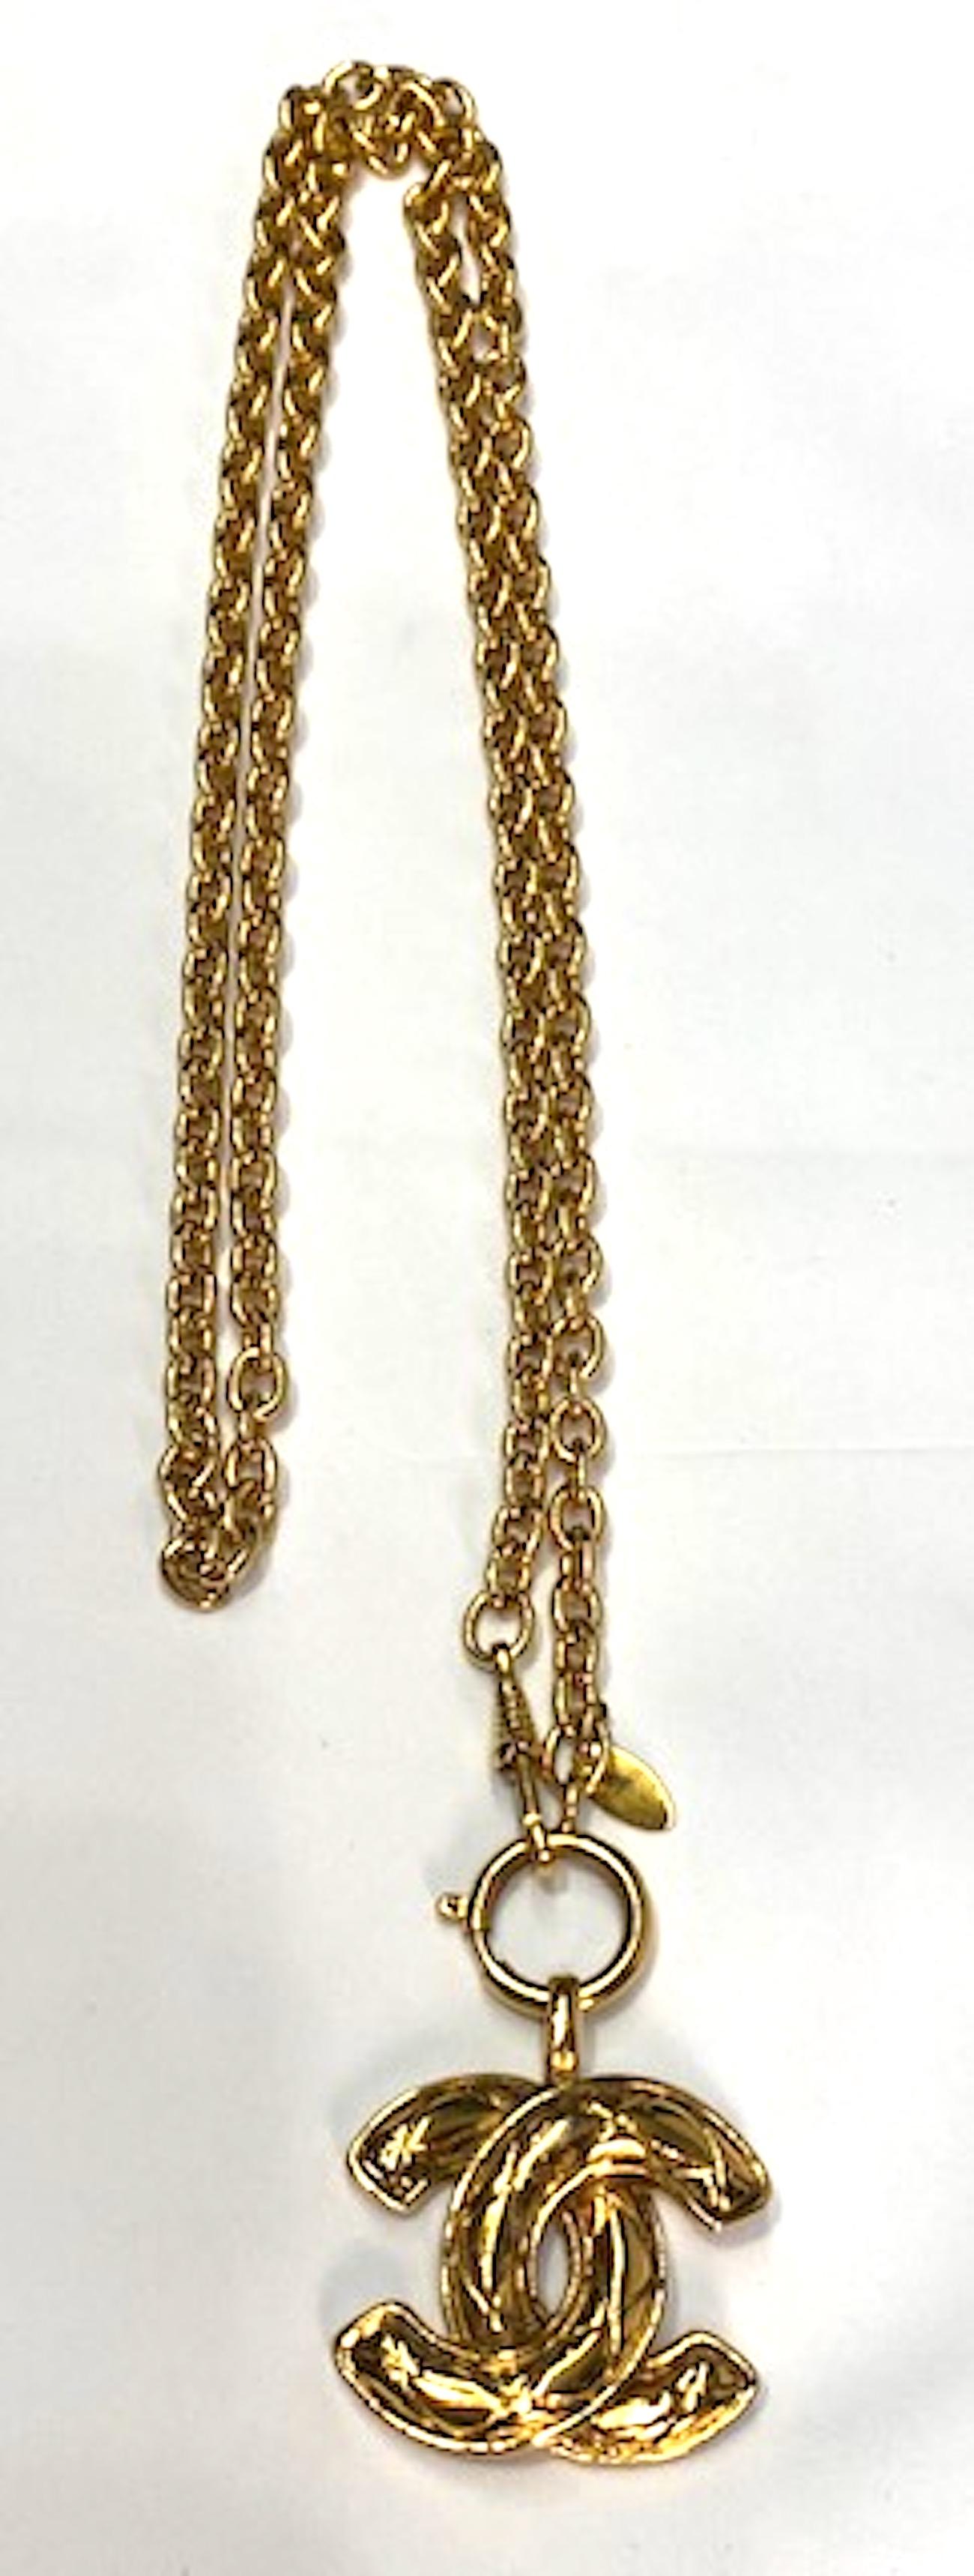 A very nice 1980s Chanel pendant necklace. The 1/4 inch diameter anchor link chain is 35 inches long. It is a watch chain style style with large jump ring on one end and an Albert watch clasp on the opposite end. The interlocking CC logo pendant has